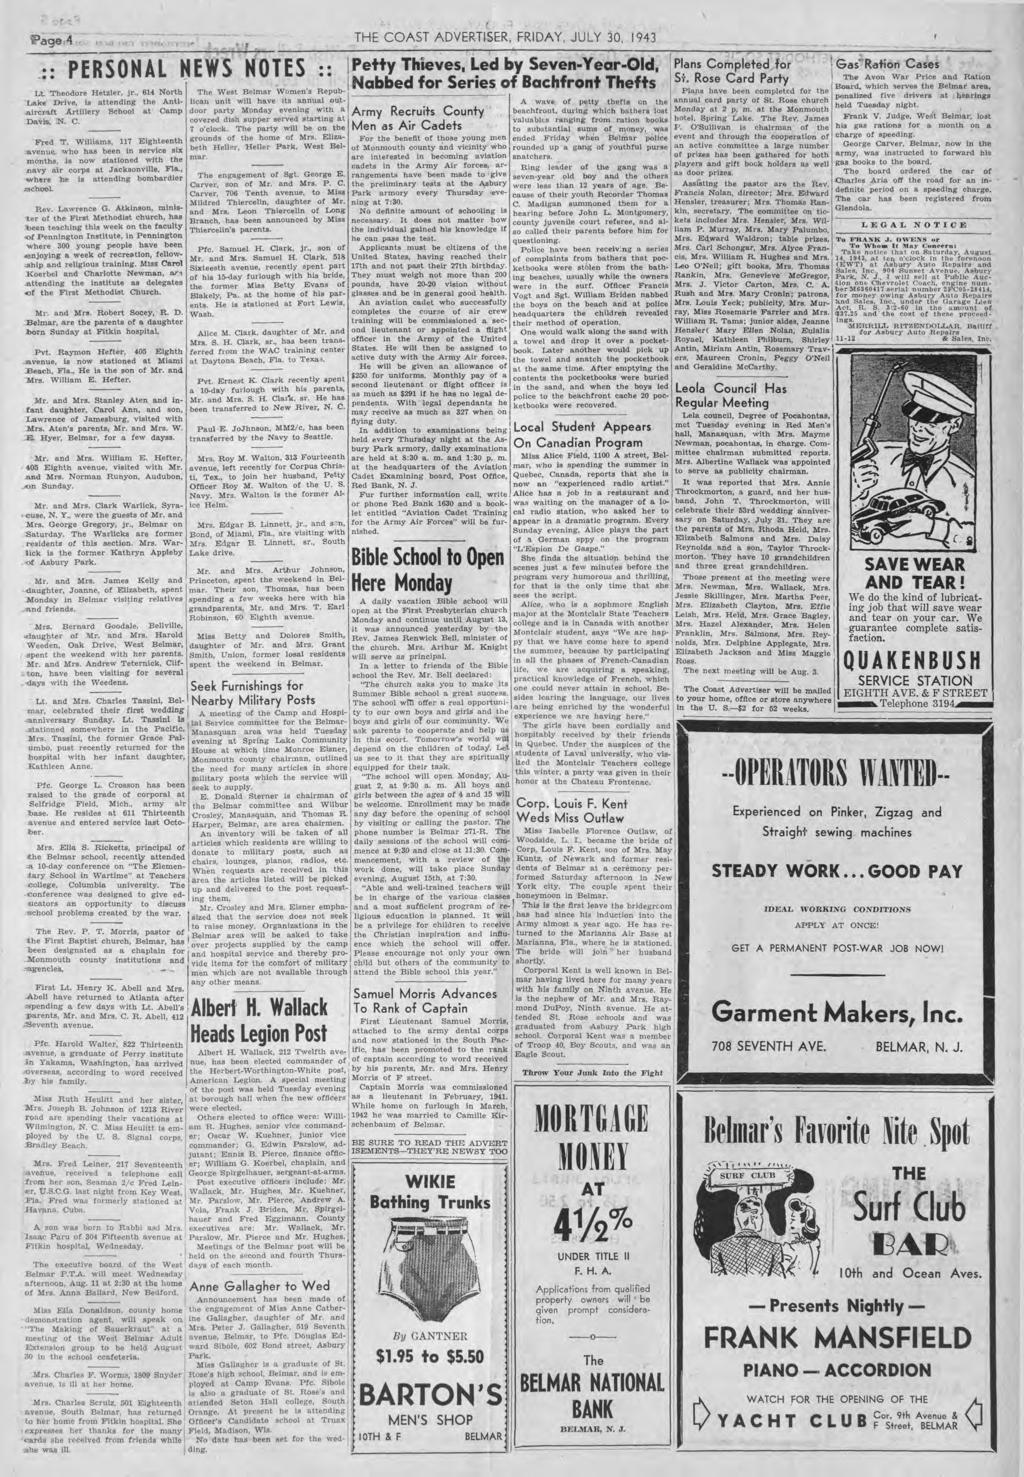 Page A 9 THE COAST ADVERTISER. FRIDAY, JULY 30, 1943 PERSONAL NEWS NOTES L t. T h e o d o r e H e tz le r, jr.